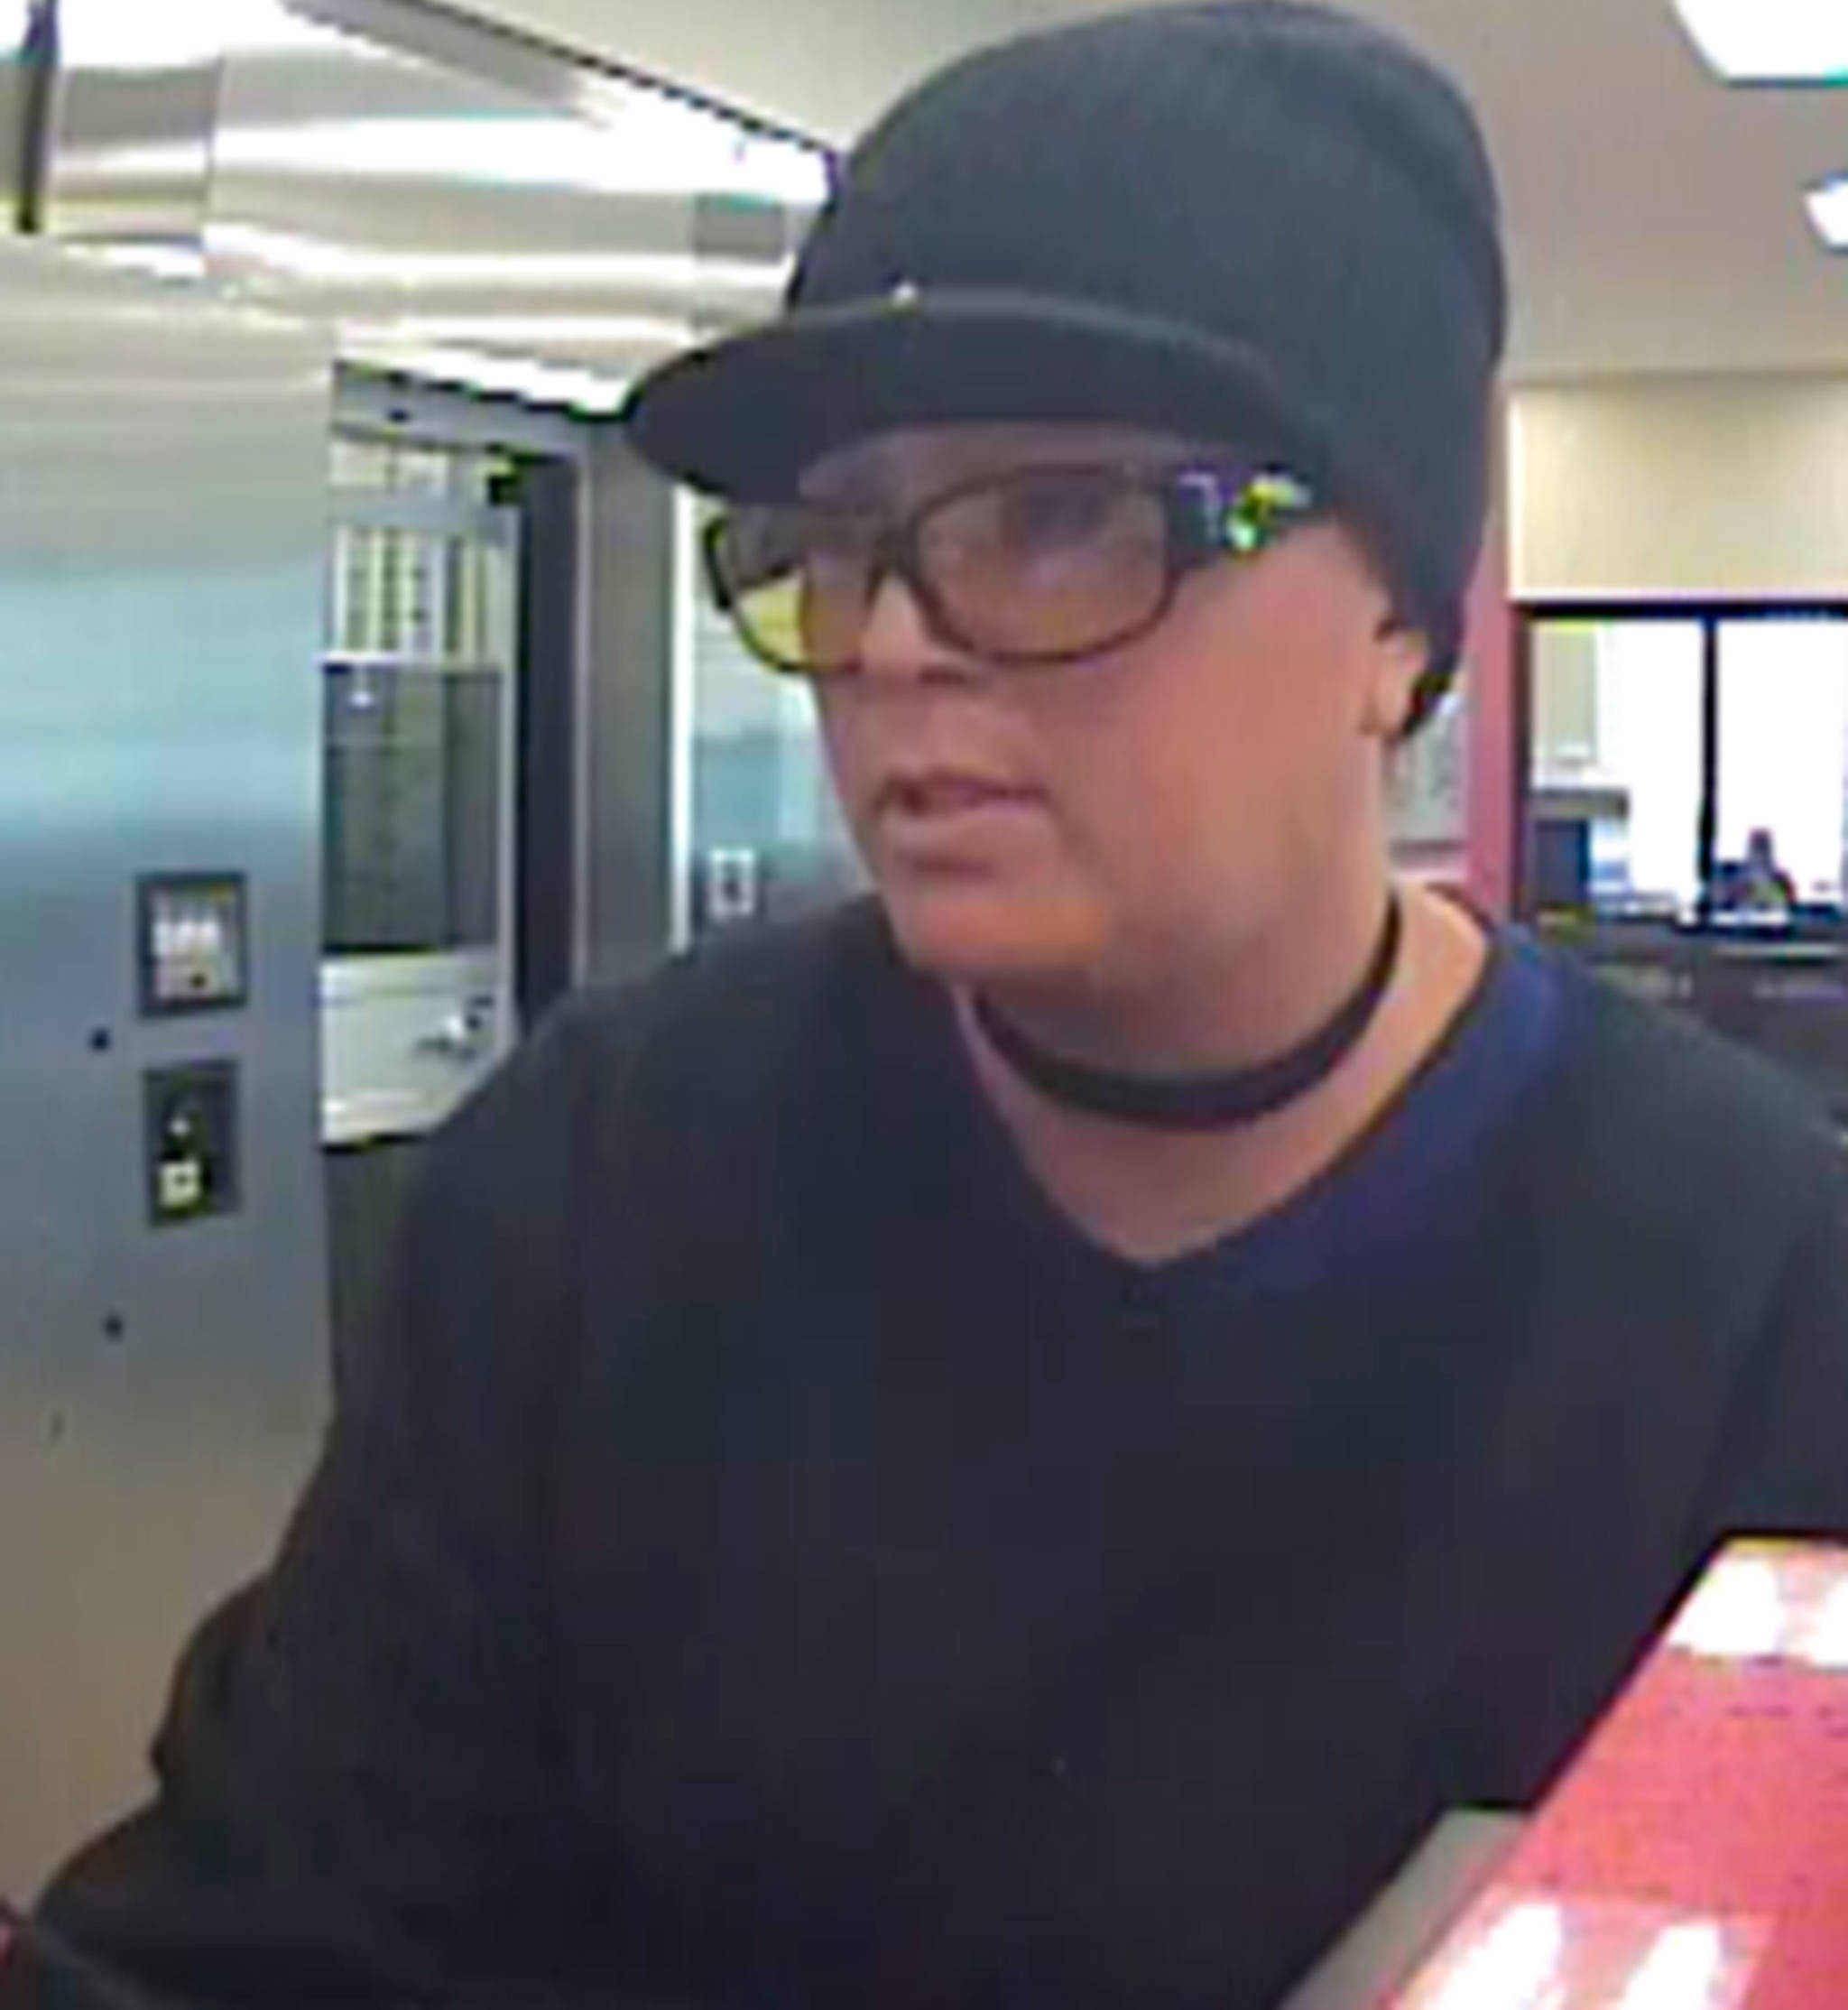 Woman robs bank in Maple Valley